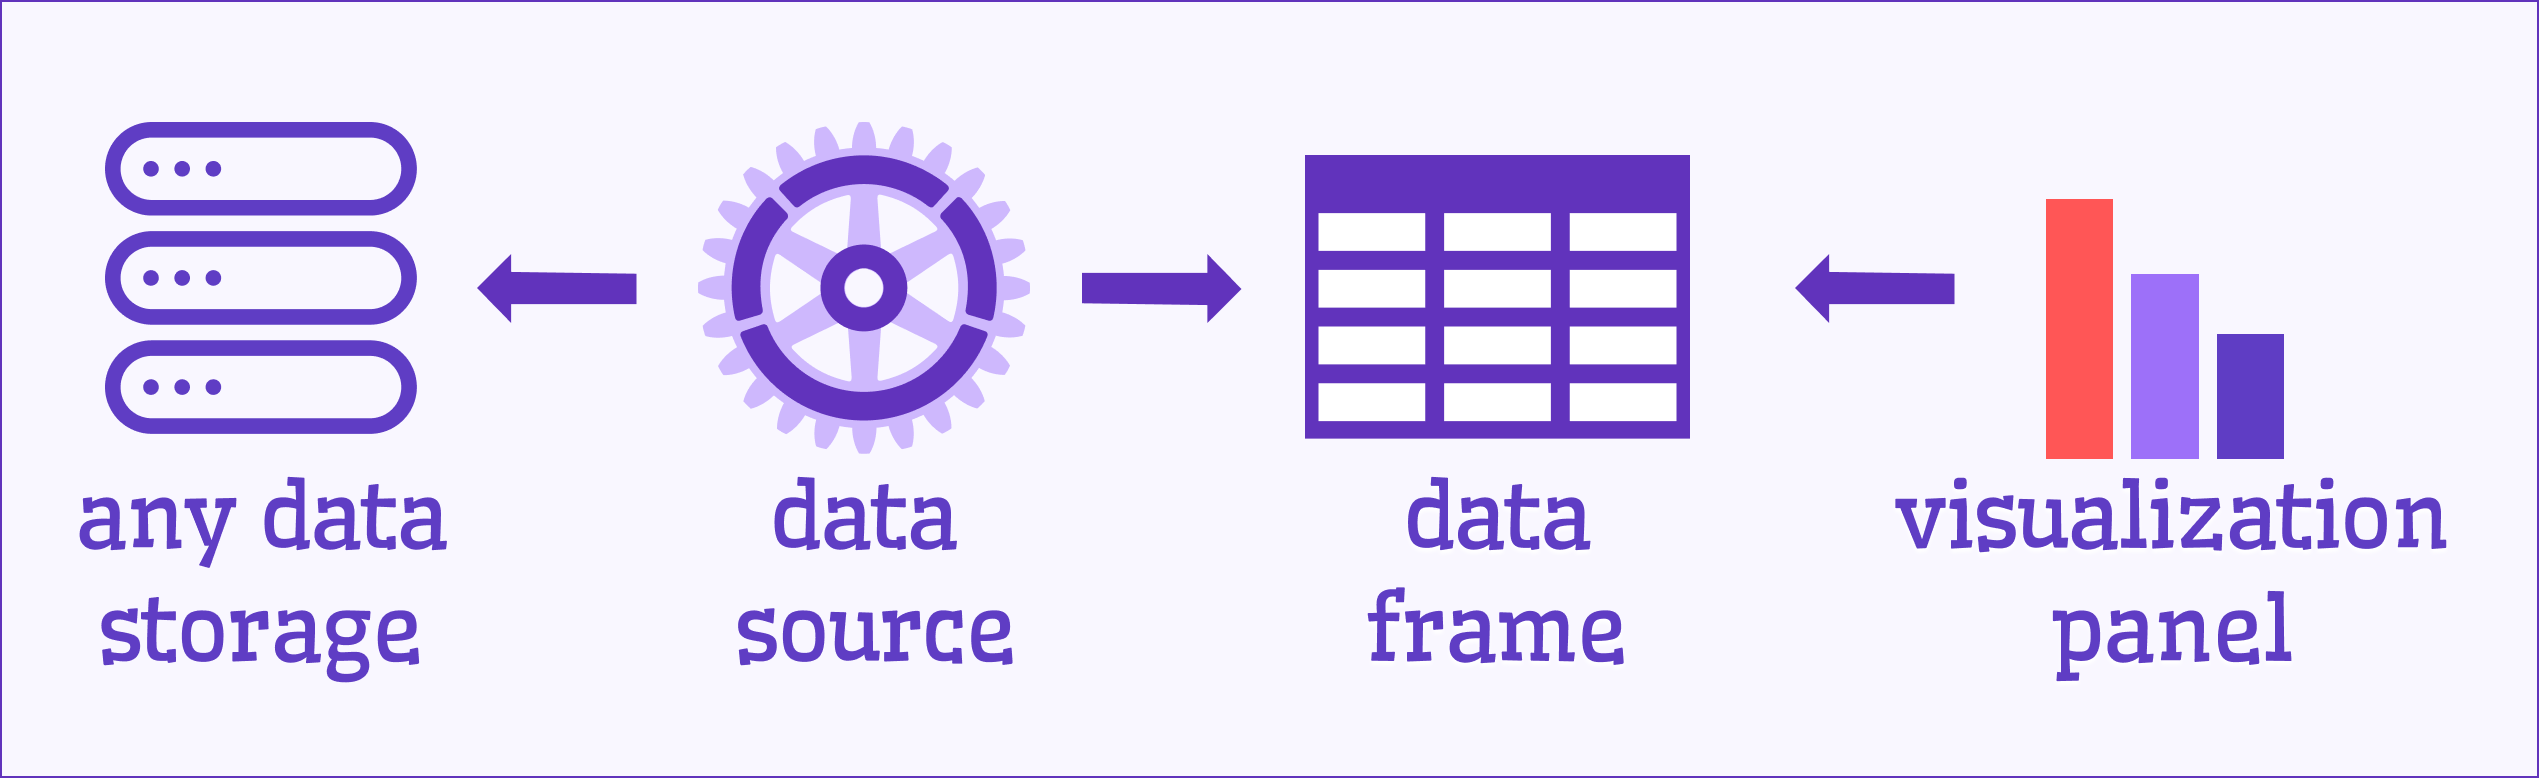 Data frames is a common denominator between a data source and panel.